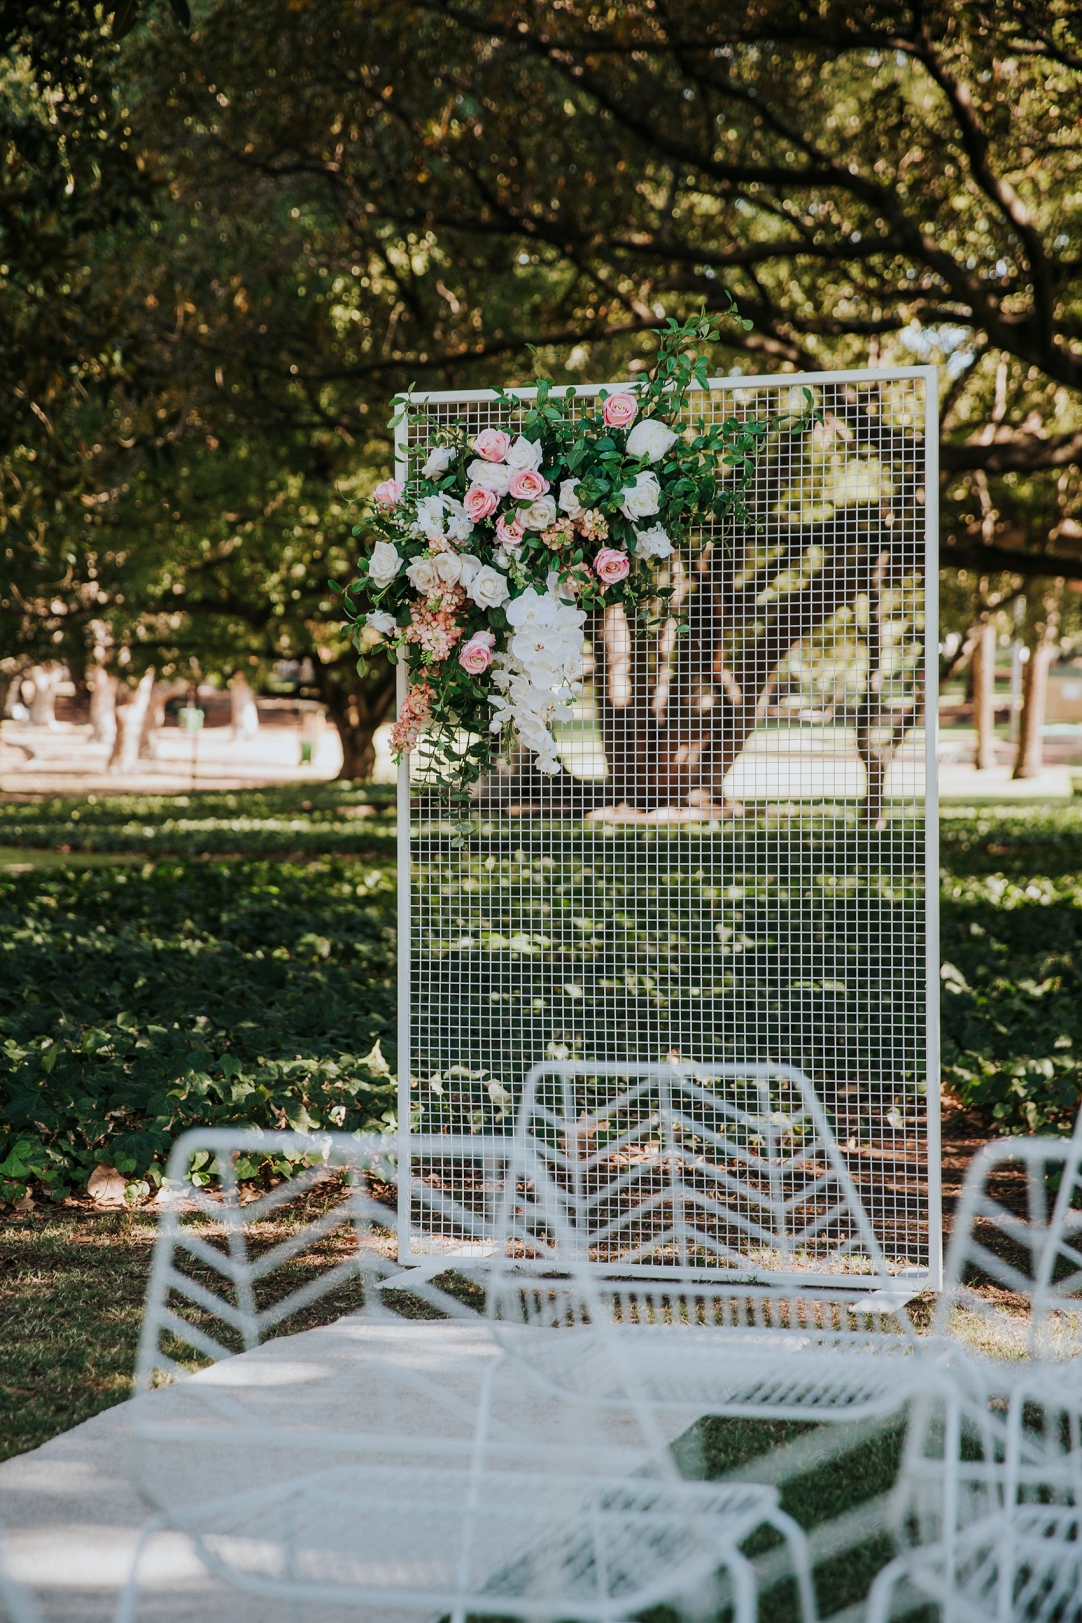 Peacock Chairs with Gold Cushions, White Carpet, Mesh Arbour and Florals